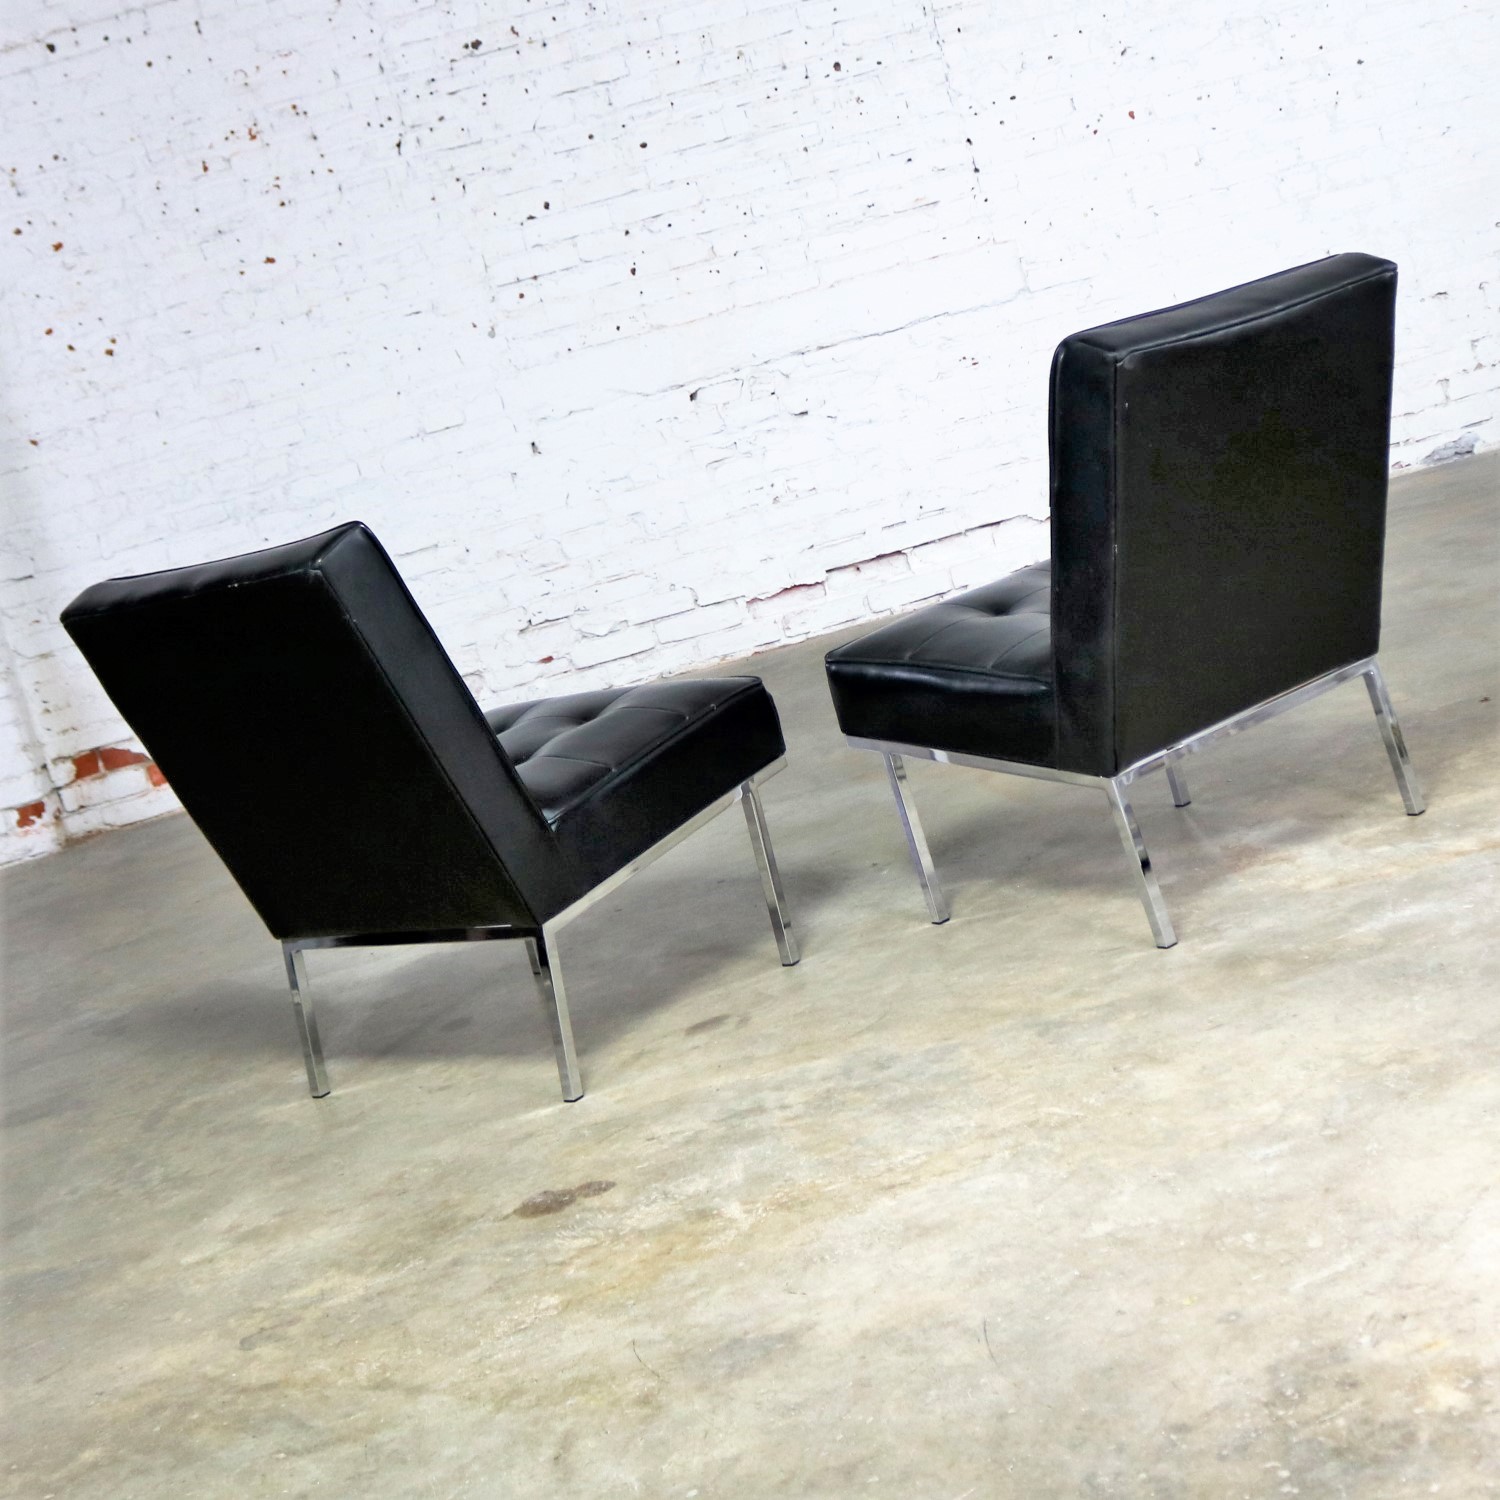 Paoli Chair Co. Black Naugahyde and Chrome MCM Slipper Chairs Style of Florence Knoll a Pair